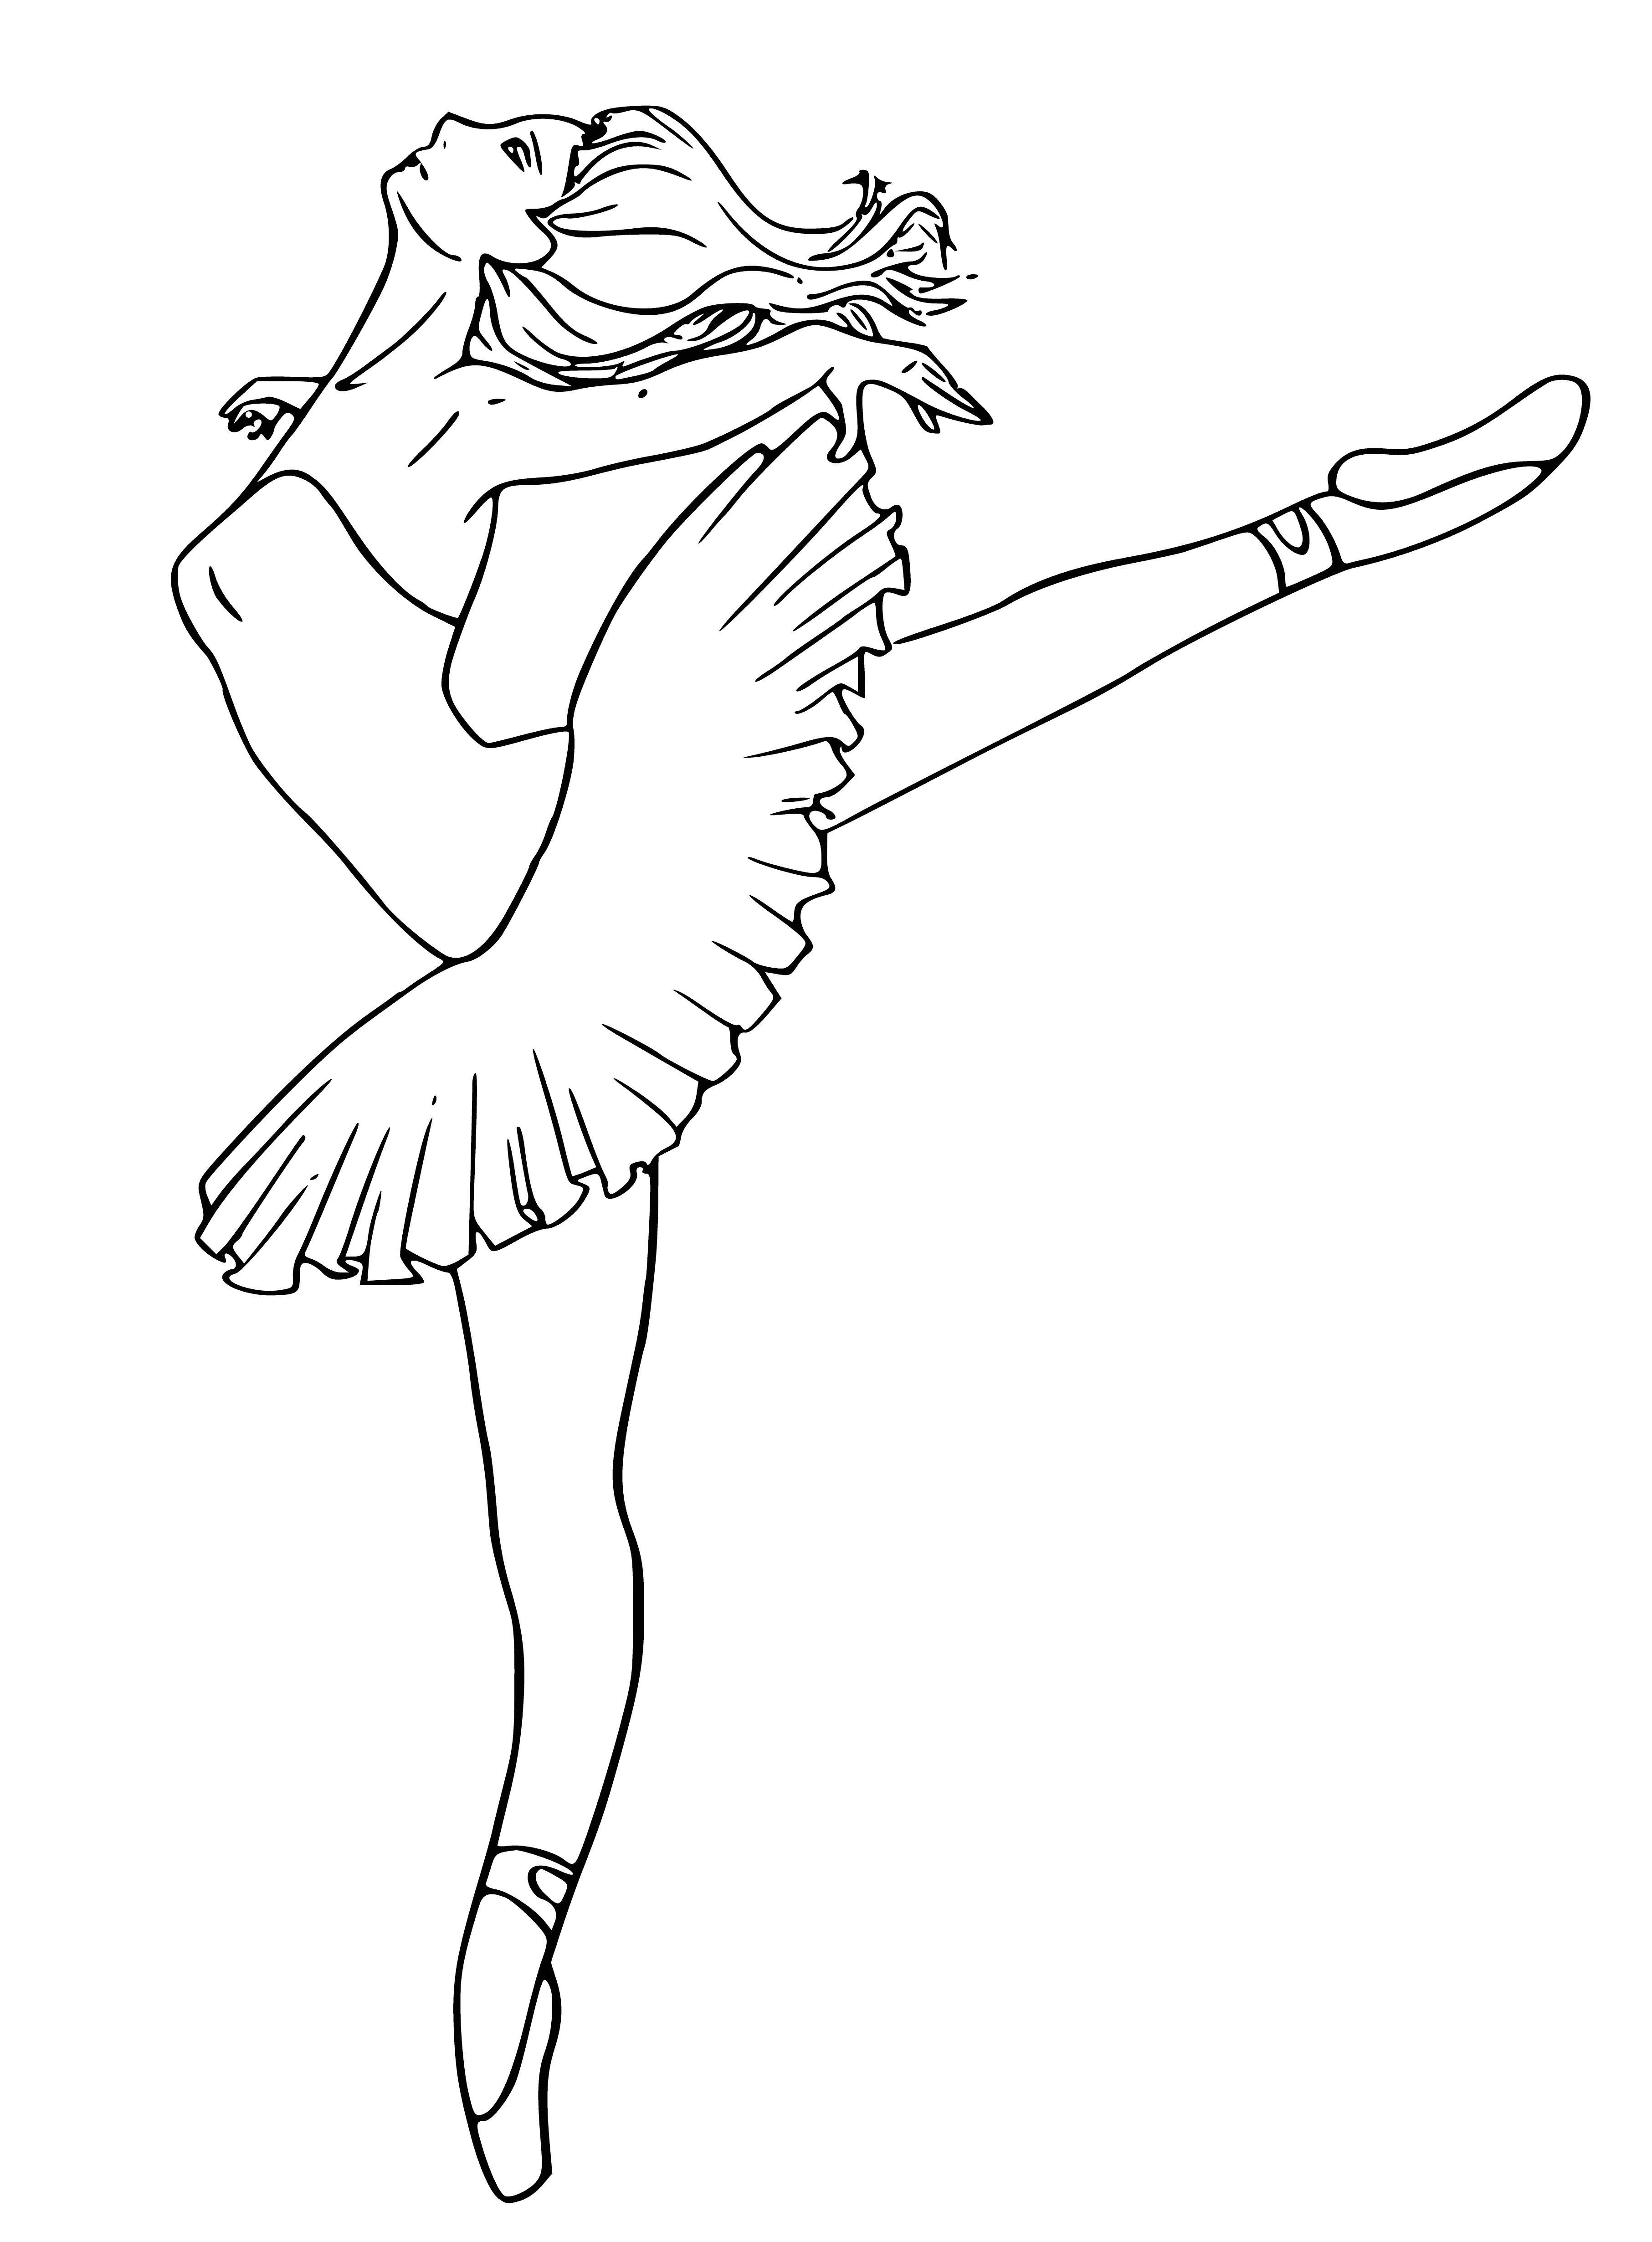 coloring page: A ballerina gracefully stands on her toes in a black tutu and tight bun, with extended arms.